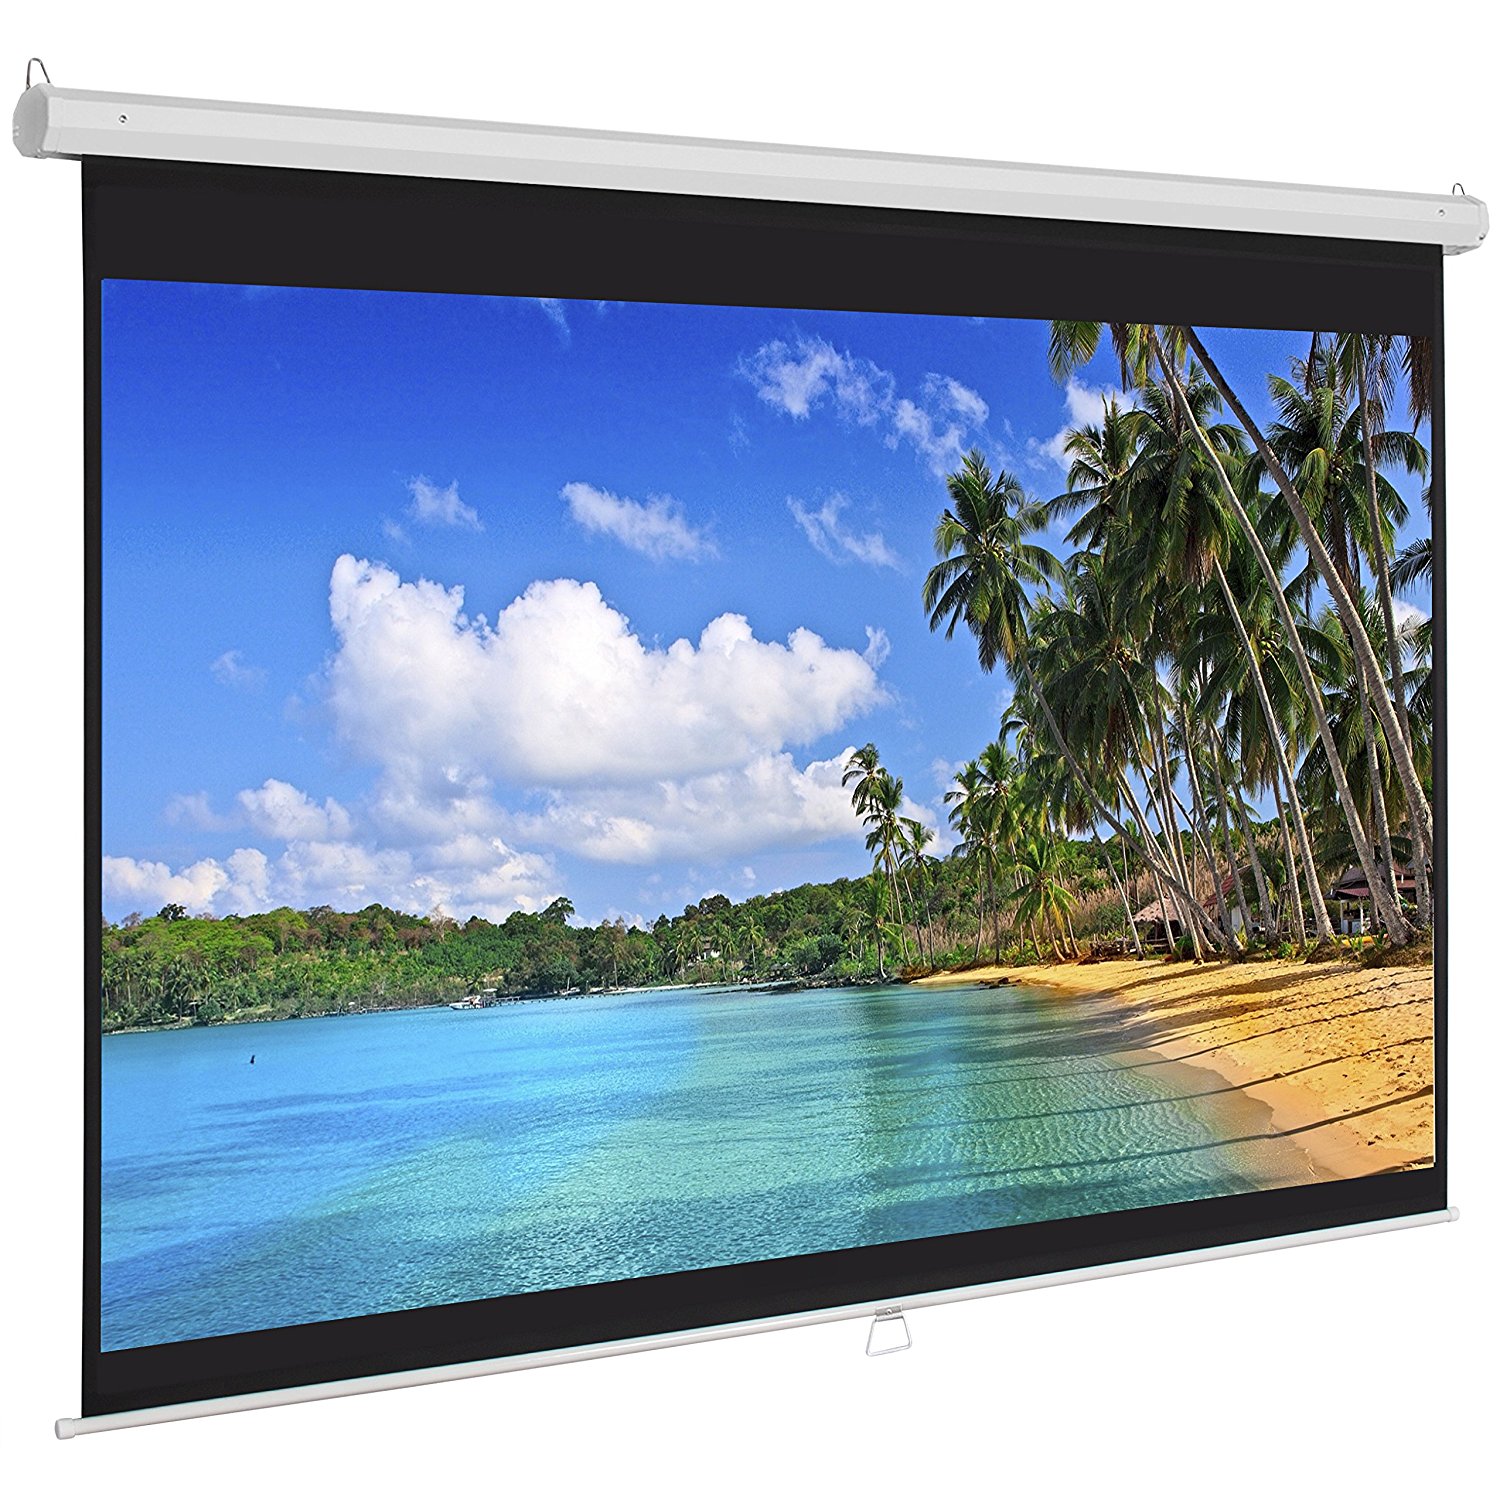 Amazon.com: Best Choice Products Manual Projector Projection Screen ...